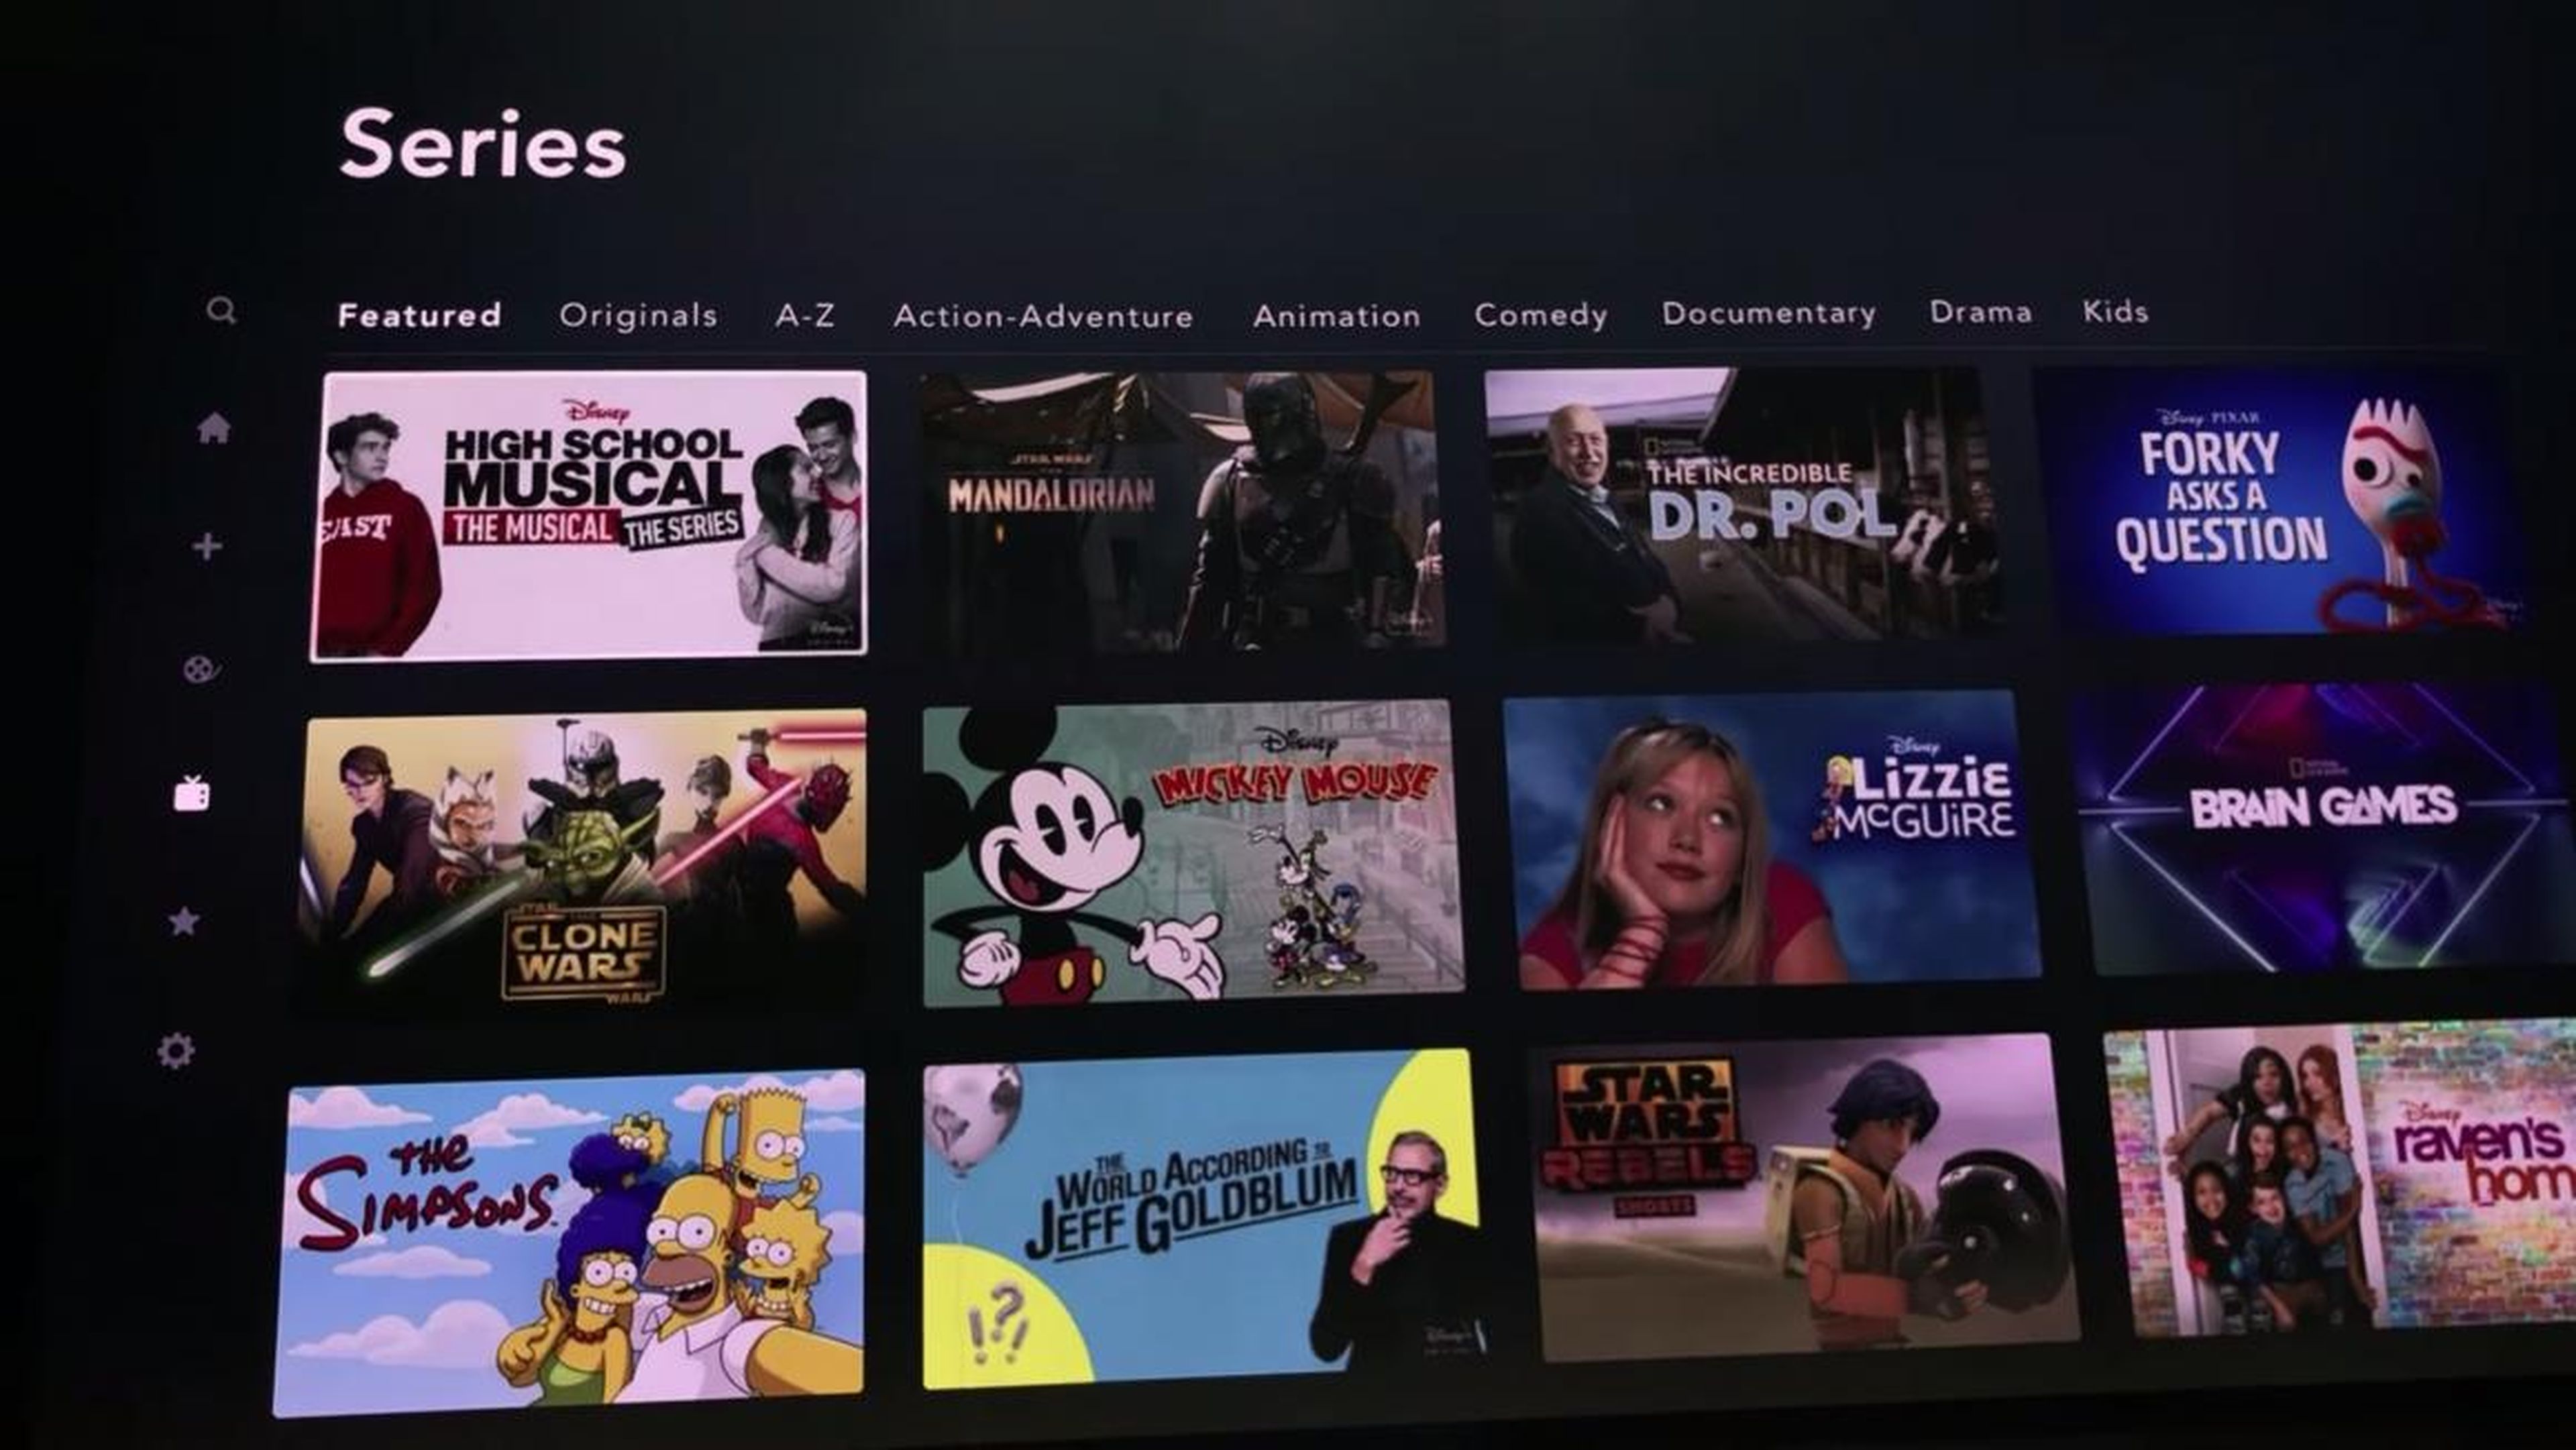 If you click the Series tab, you'll see similar filters to choose which TV show you want to watch.